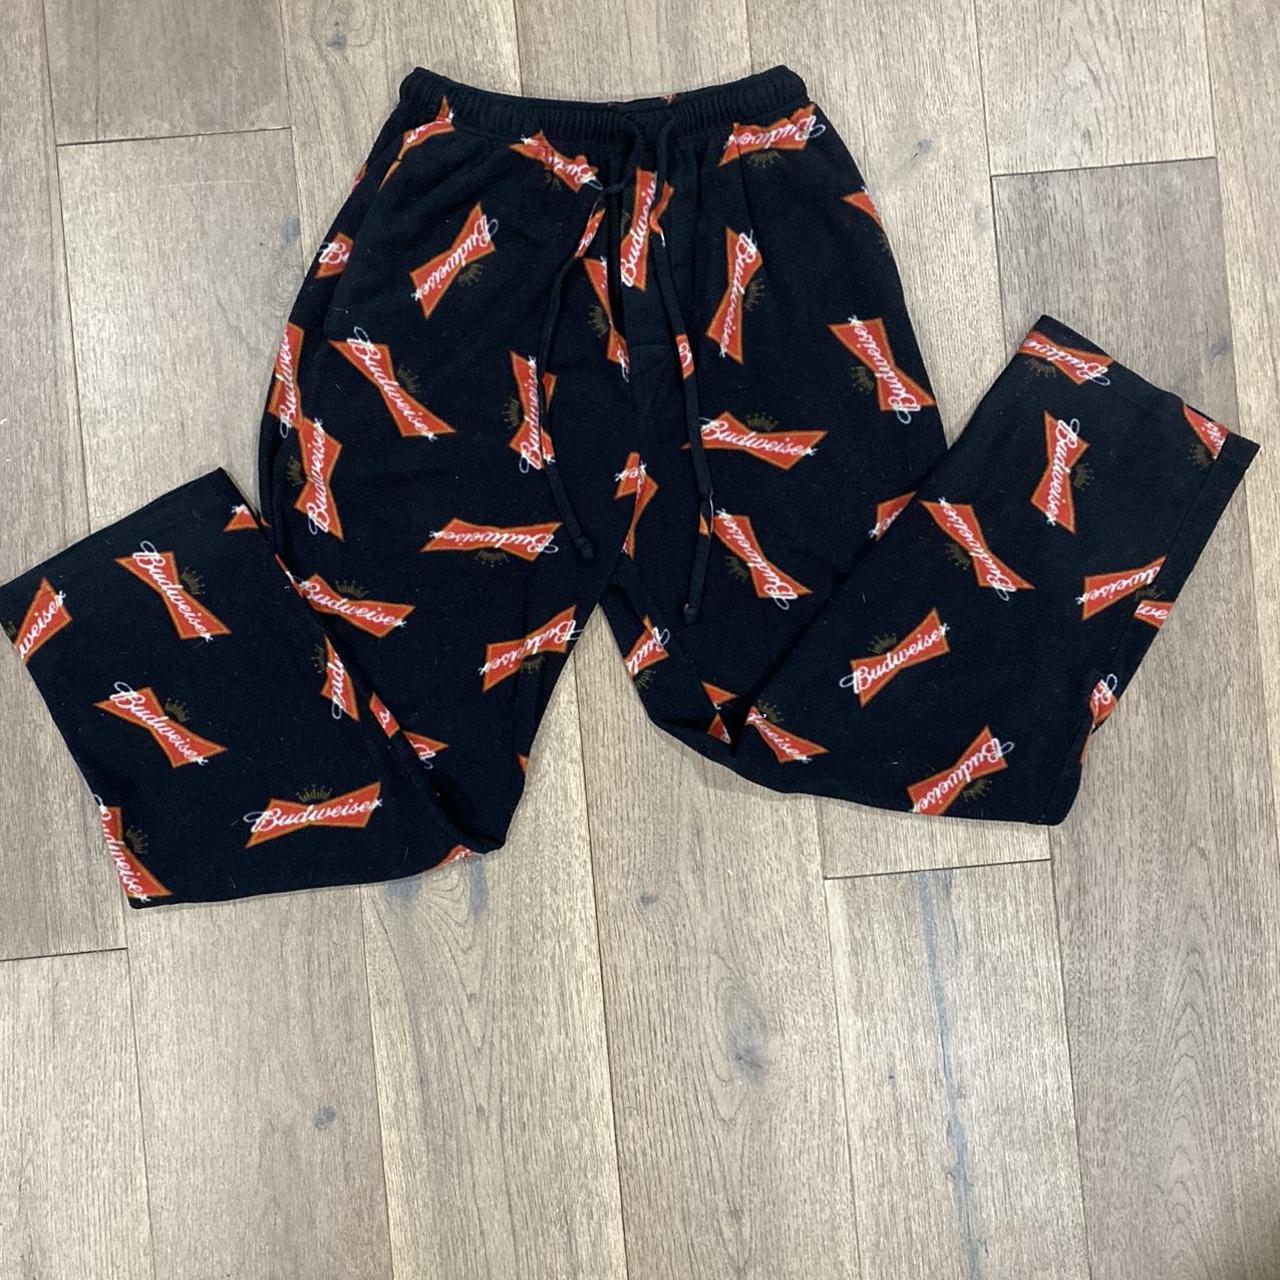 Budweiser pajama pants. They’re super cozy and don’t... - Depop